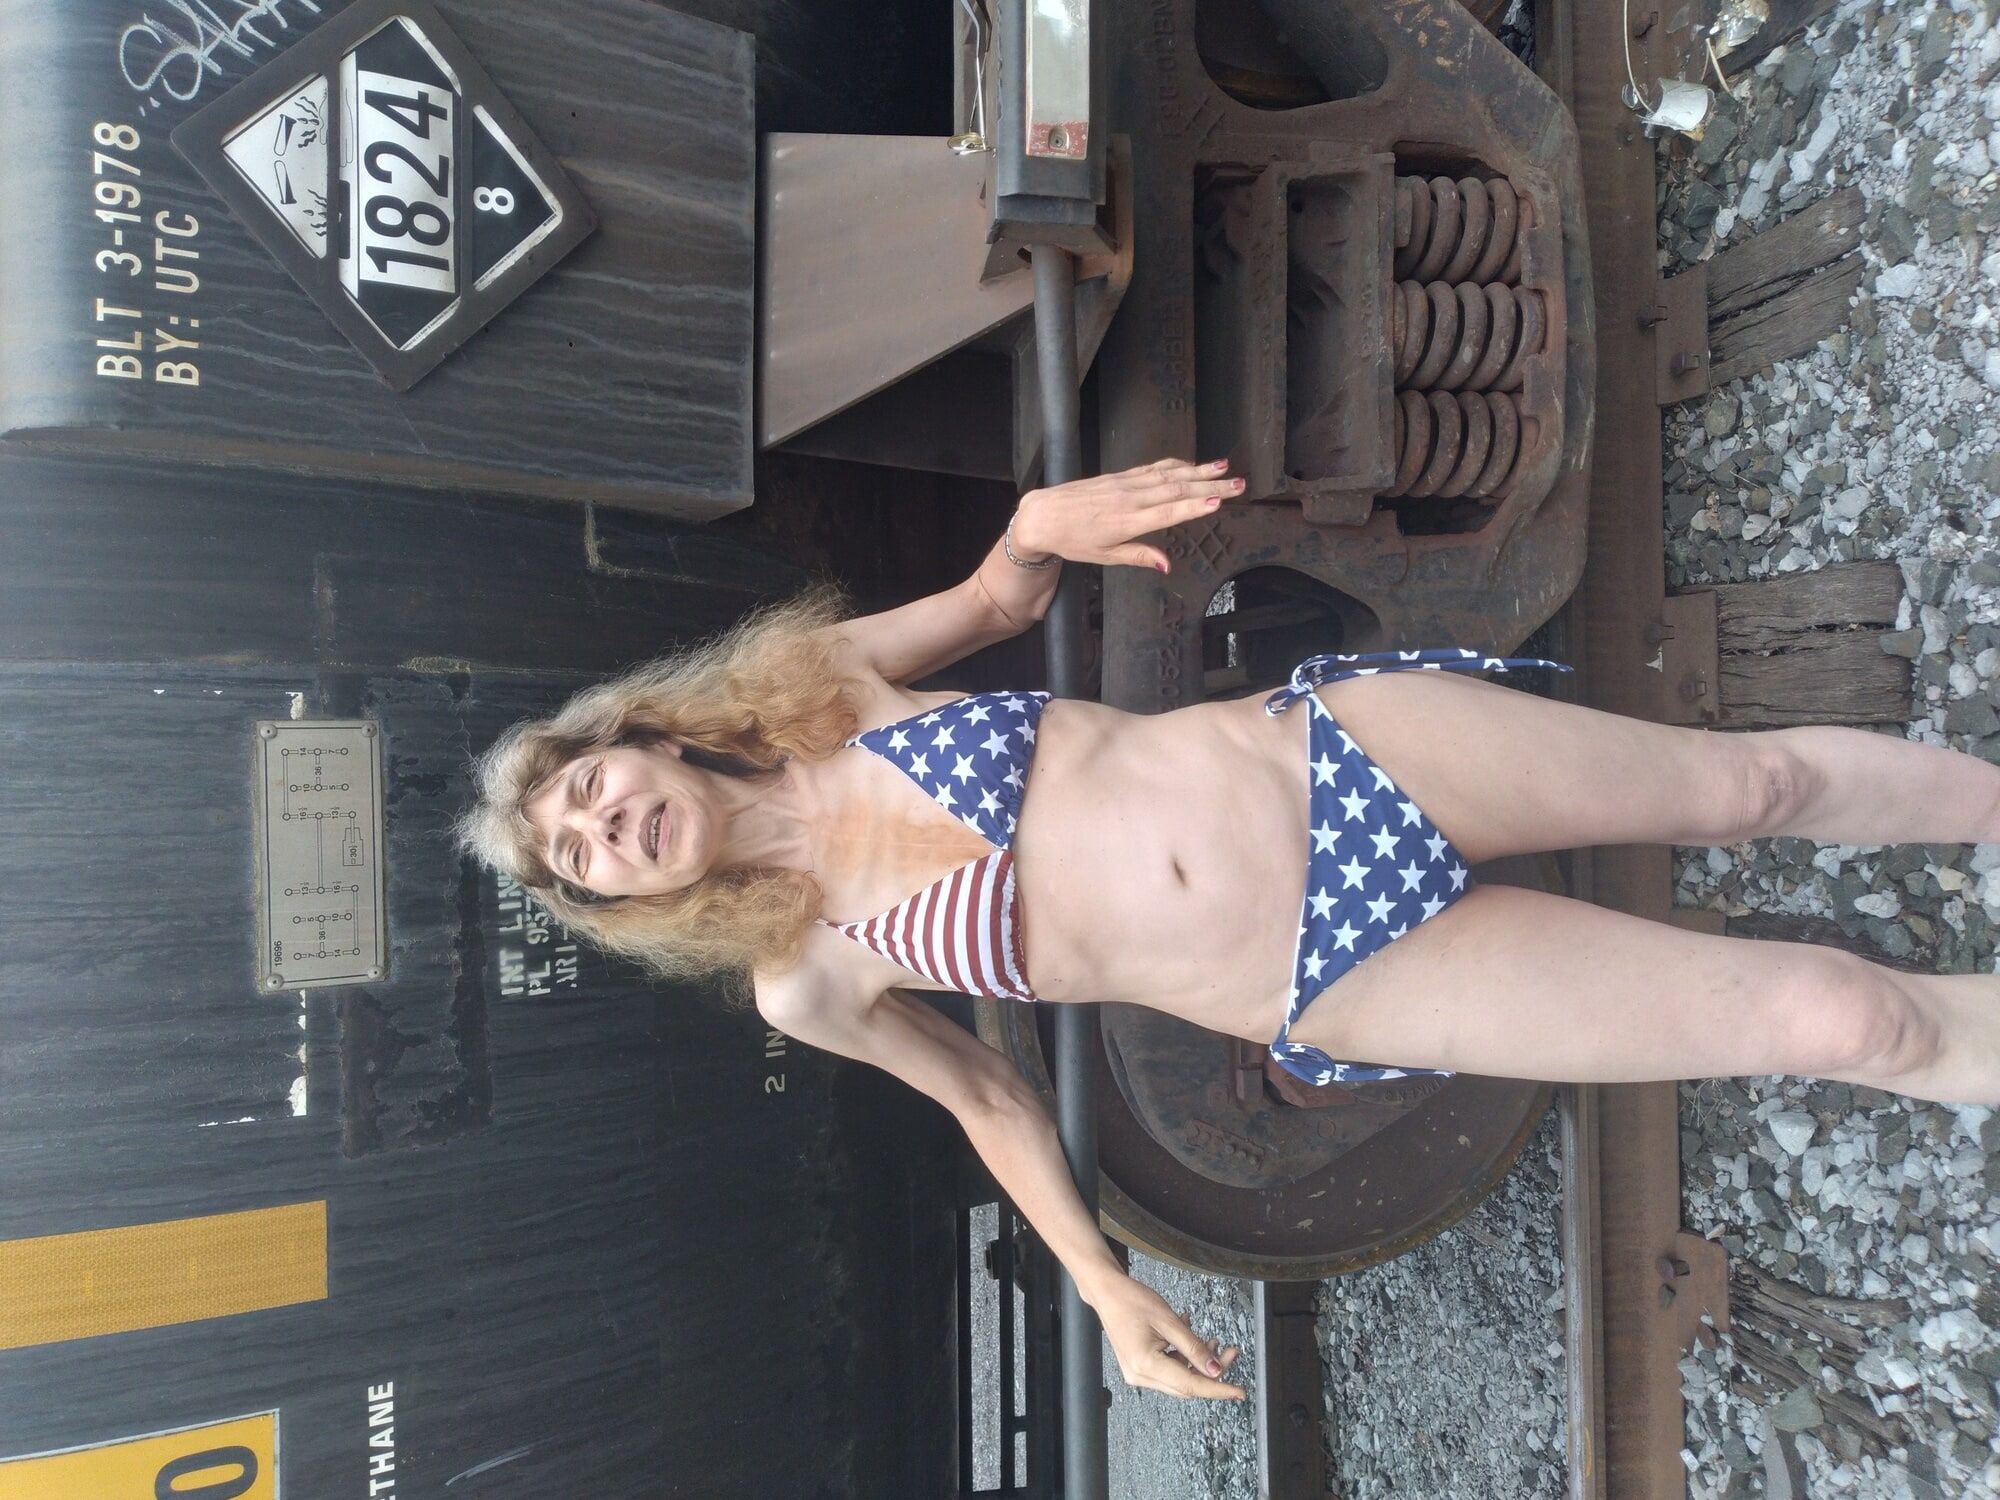 American Train. July 4th release. My best photo set to date. #35